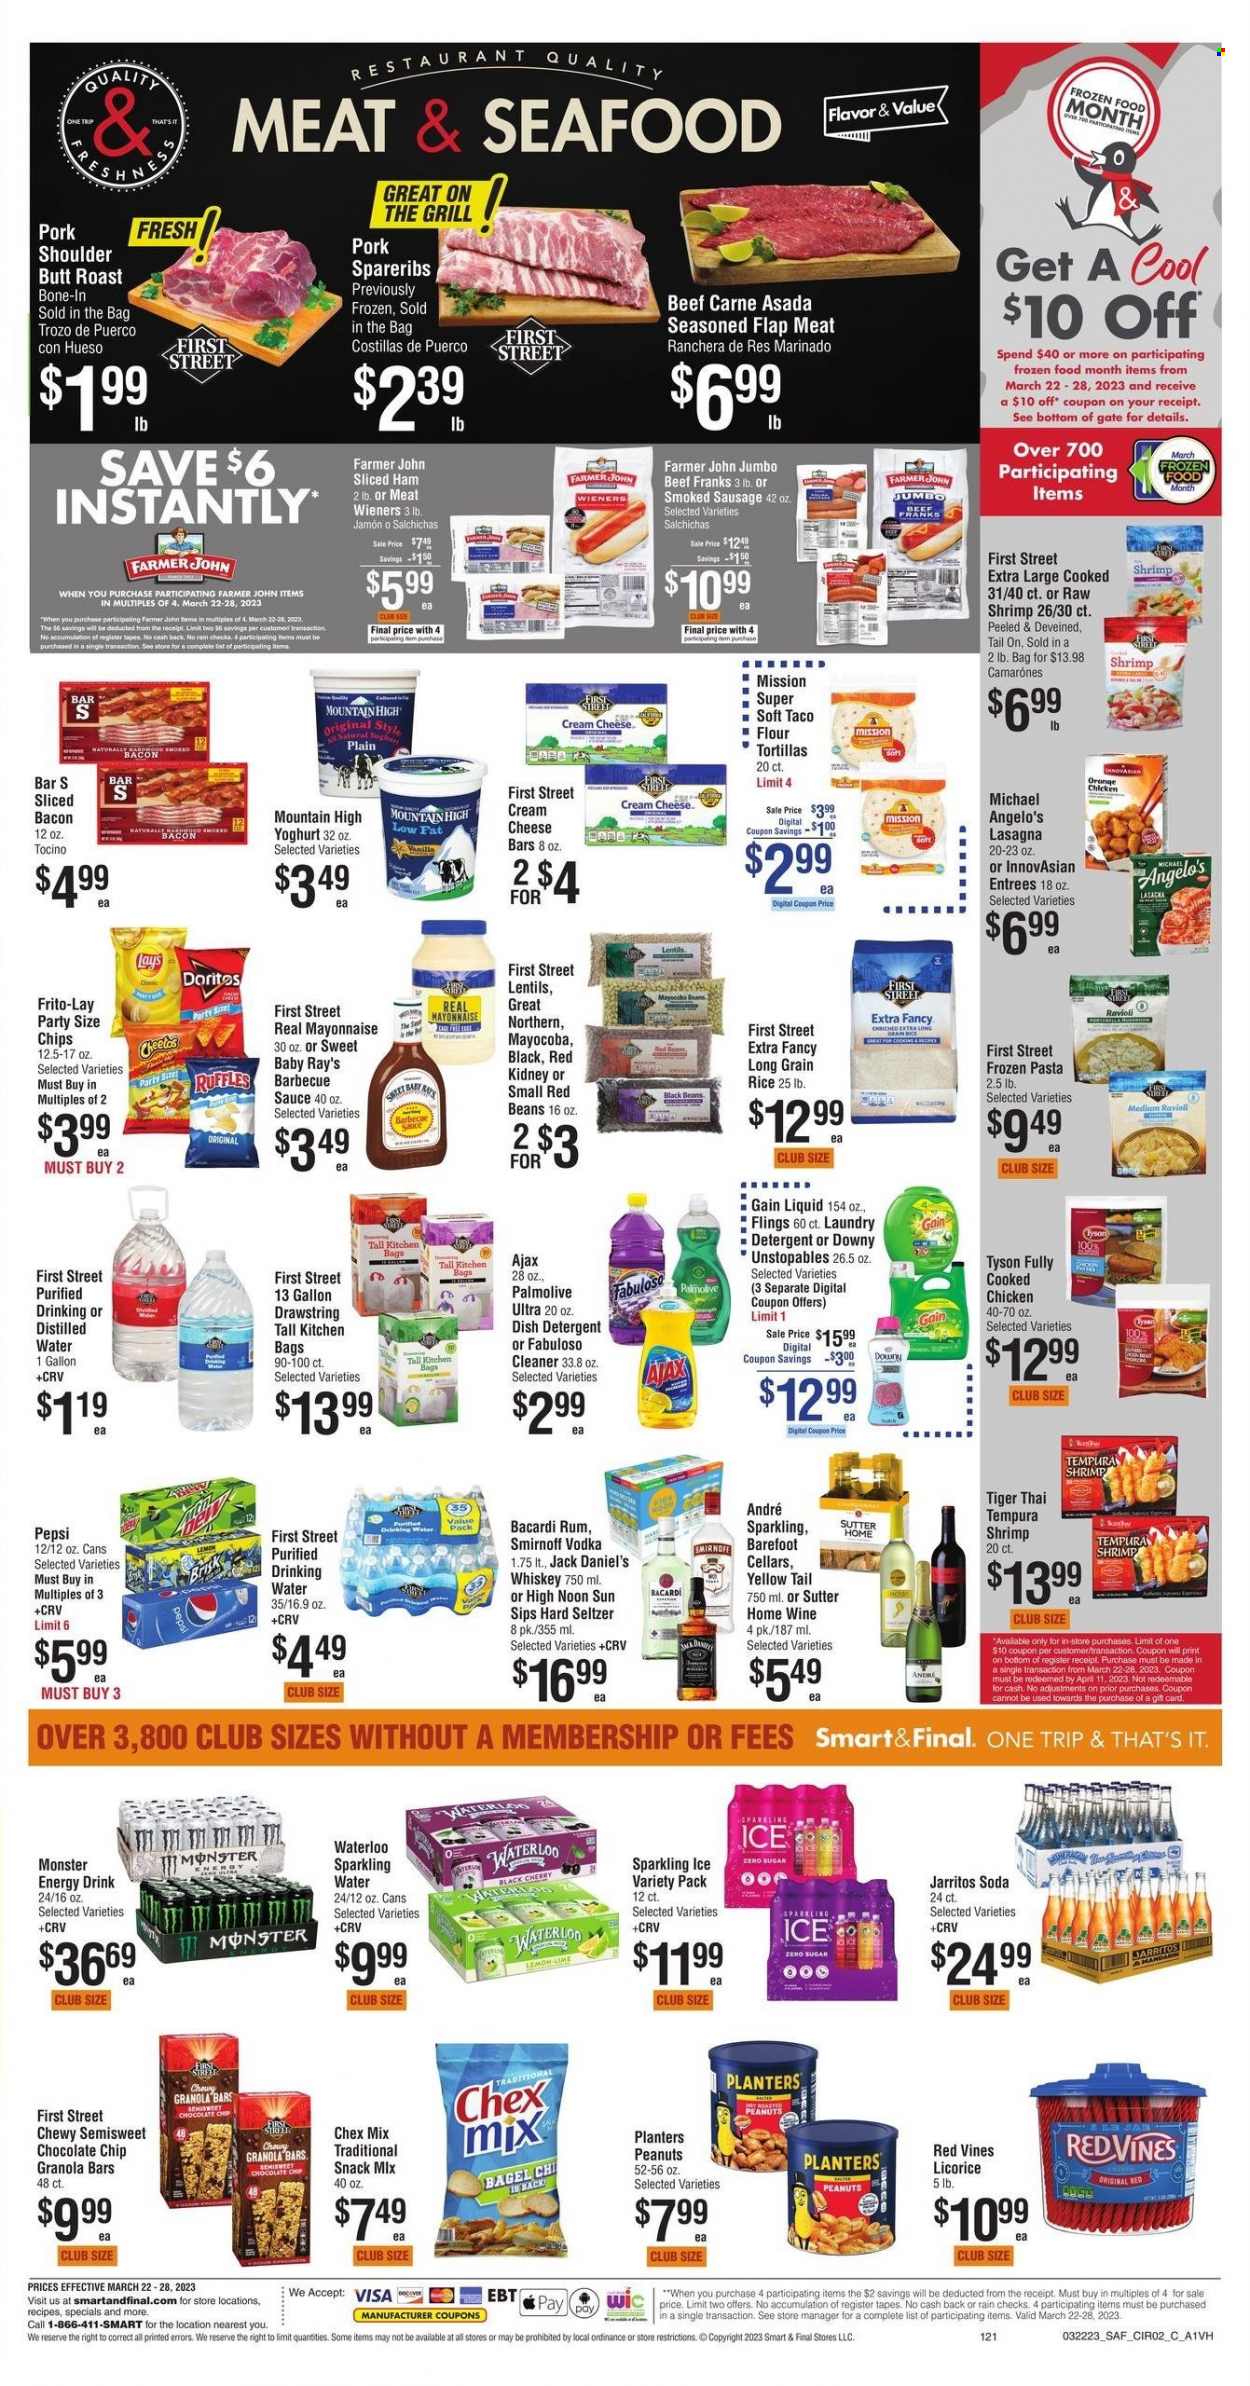 thumbnail - Smart & Final Flyer - 03/22/2023 - 03/28/2023 - Sales products - bagels, flour tortillas, beans, cherries, seafood, shrimps, Jack Daniel's, sauce, lasagna meal, roast, bacon, ham, sausage, smoked sausage, yoghurt, mayonnaise, chocolate chips, snack, Doritos, Cheetos, Lay’s, Frito-Lay, Ruffles, Chex Mix, sugar, black beans, lentils, red beans, granola bar, rice, long grain rice, peanuts, Planters, Pepsi, energy drink, Monster, Monster Energy, soda, sparkling water, water, Bacardi, rum, Smirnoff, vodka, whiskey, Hard Seltzer, whisky, chicken, pork meat, pork shoulder, pork spare ribs, detergent, Gain, cleaner, Ajax, Fabuloso, Unstopables, laundry detergent, dishwasher cleaner, Palmolive. Page 2.